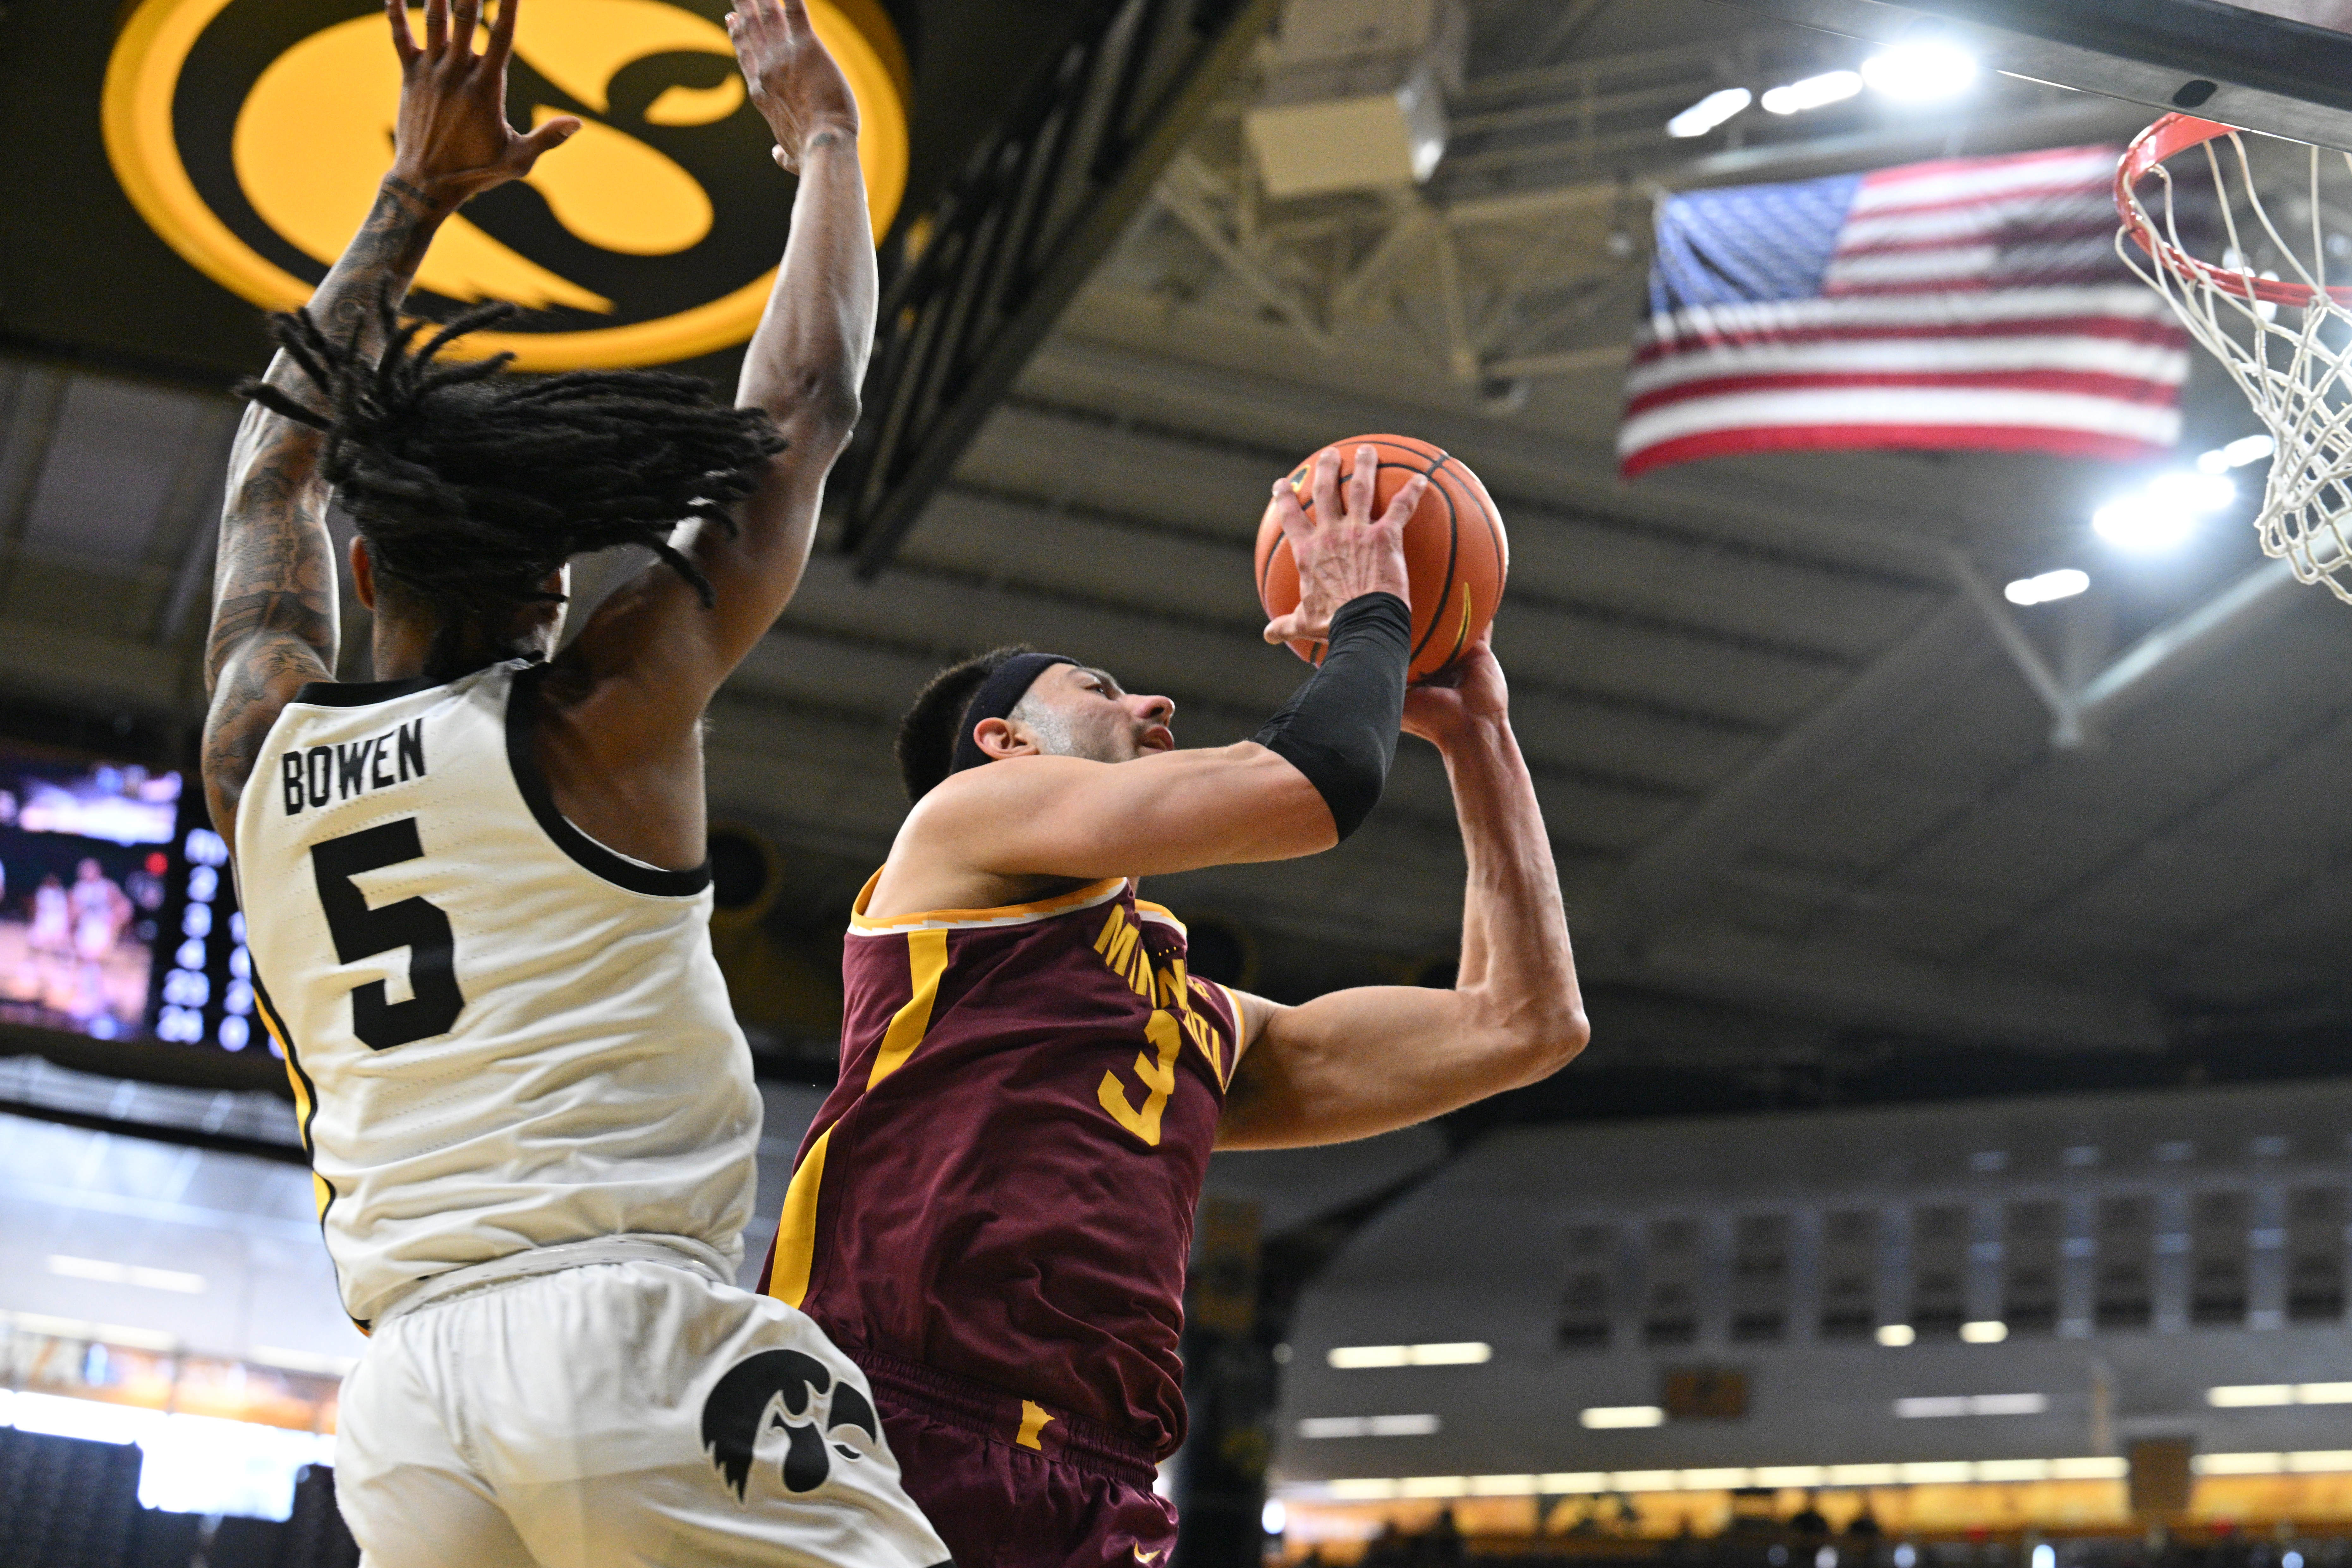 Iowa suffers setback against Minnesota after coming tantalizingly